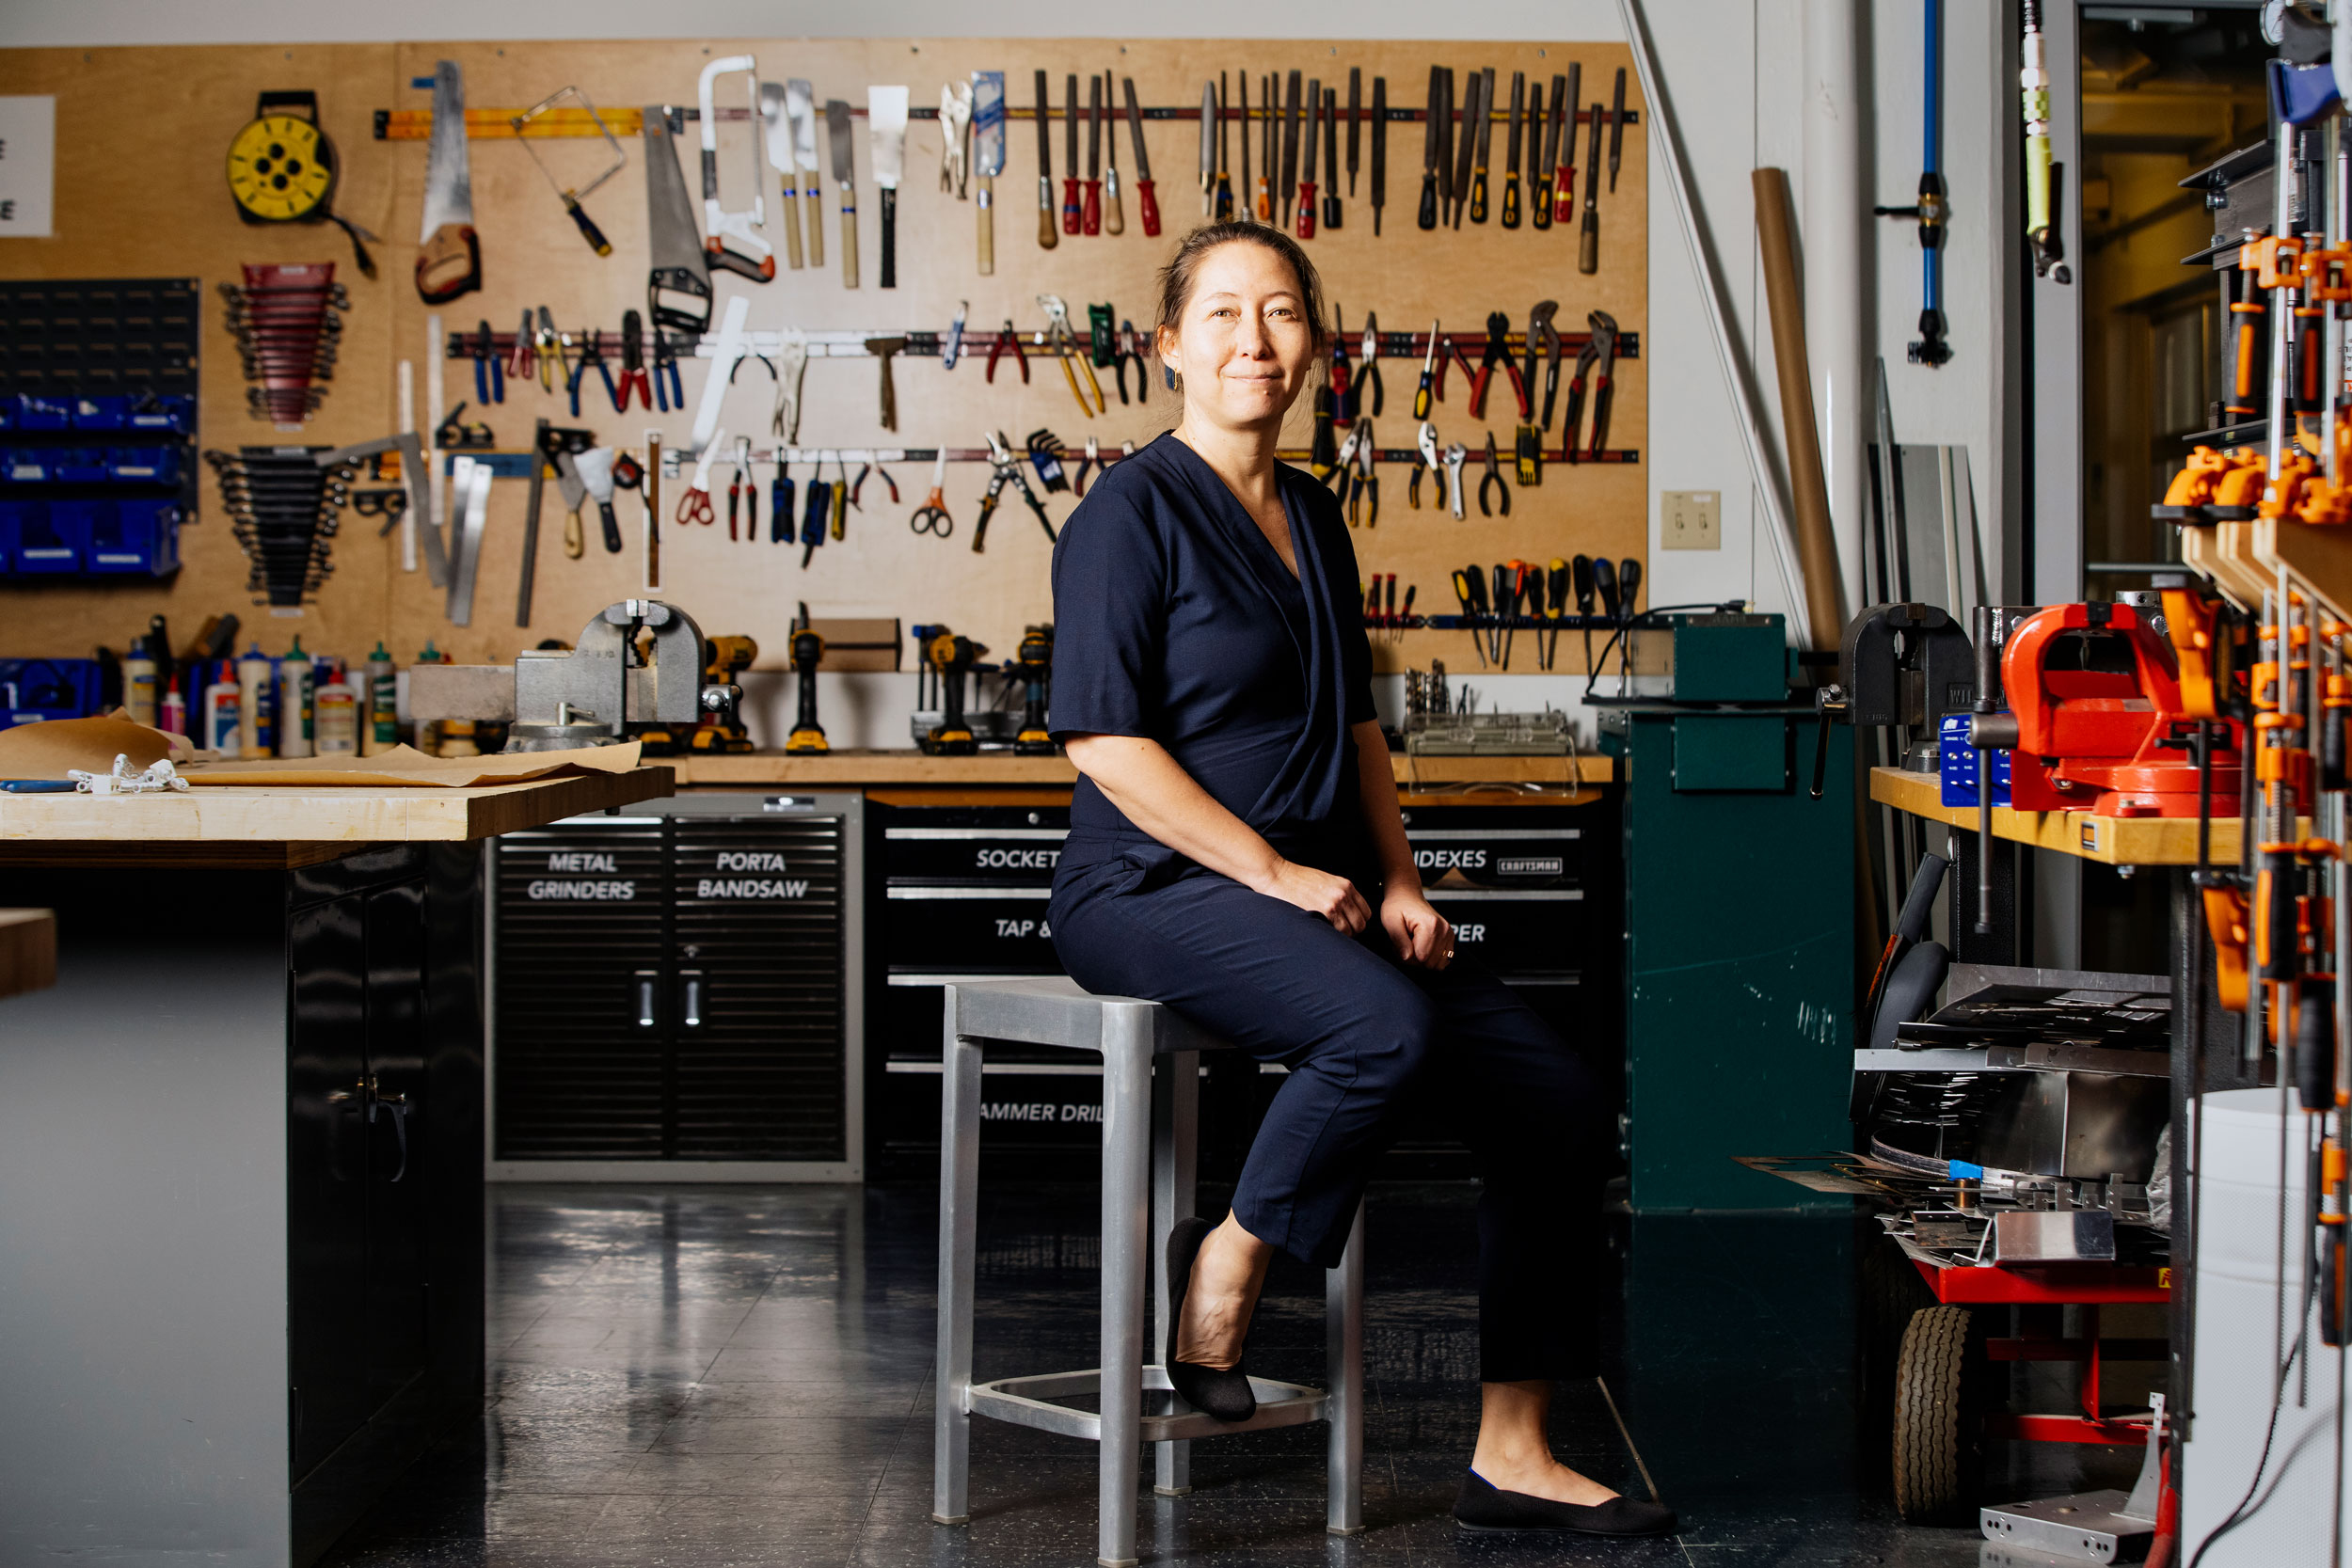 MIT architecture professor Miho Mazereeuw’s work on disaster resilience focuses on plans, people, and policies, well as technology and design, to prepare for the future.